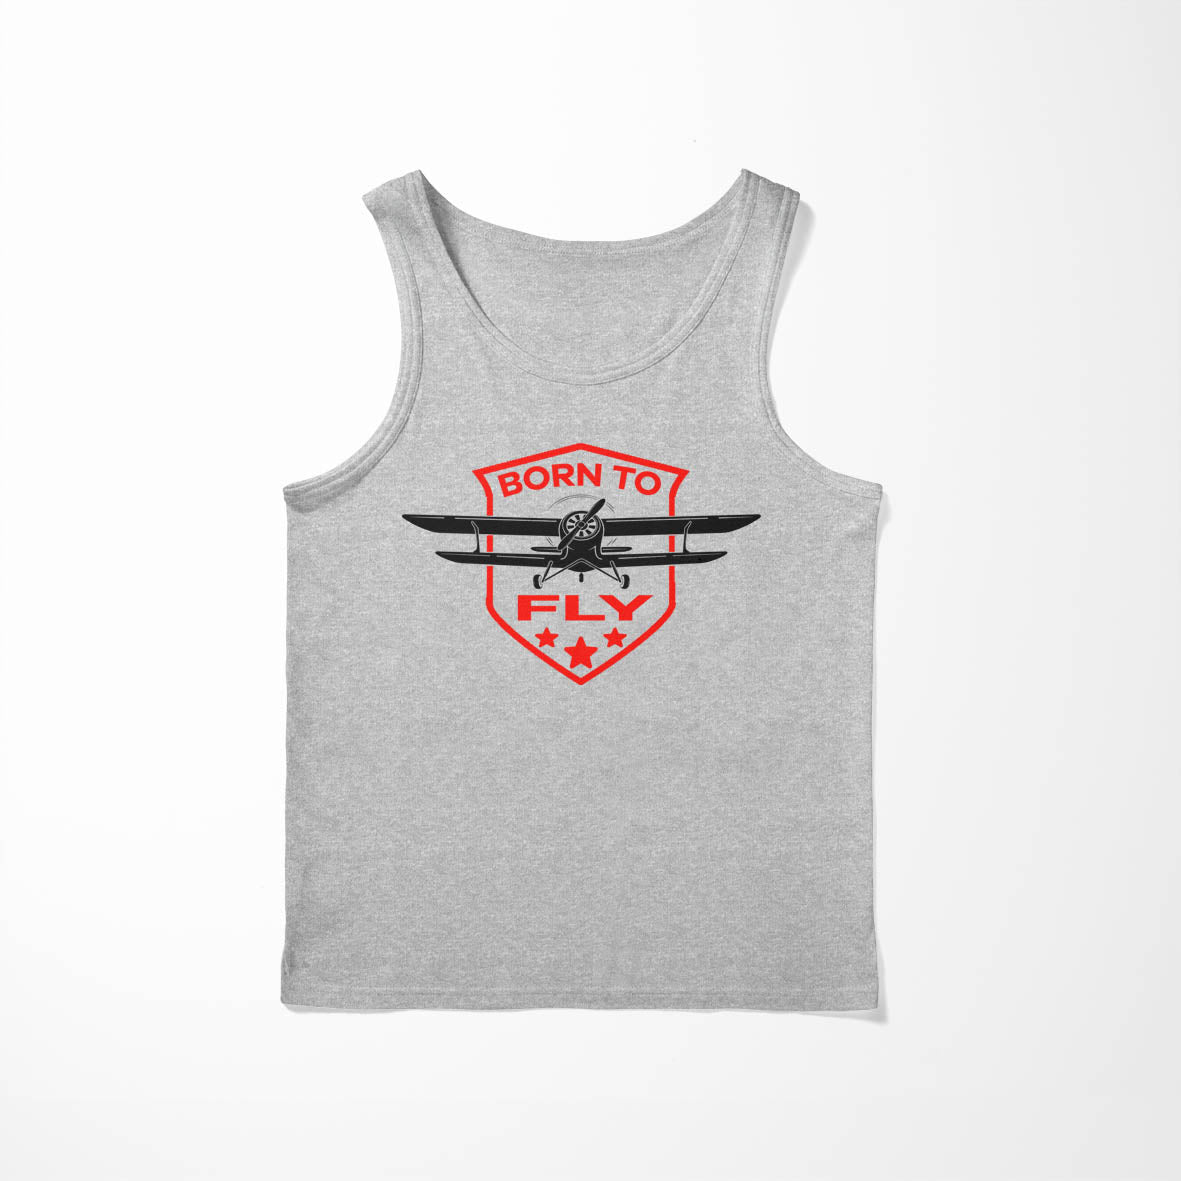 Born To Fly Designed Tank Tops